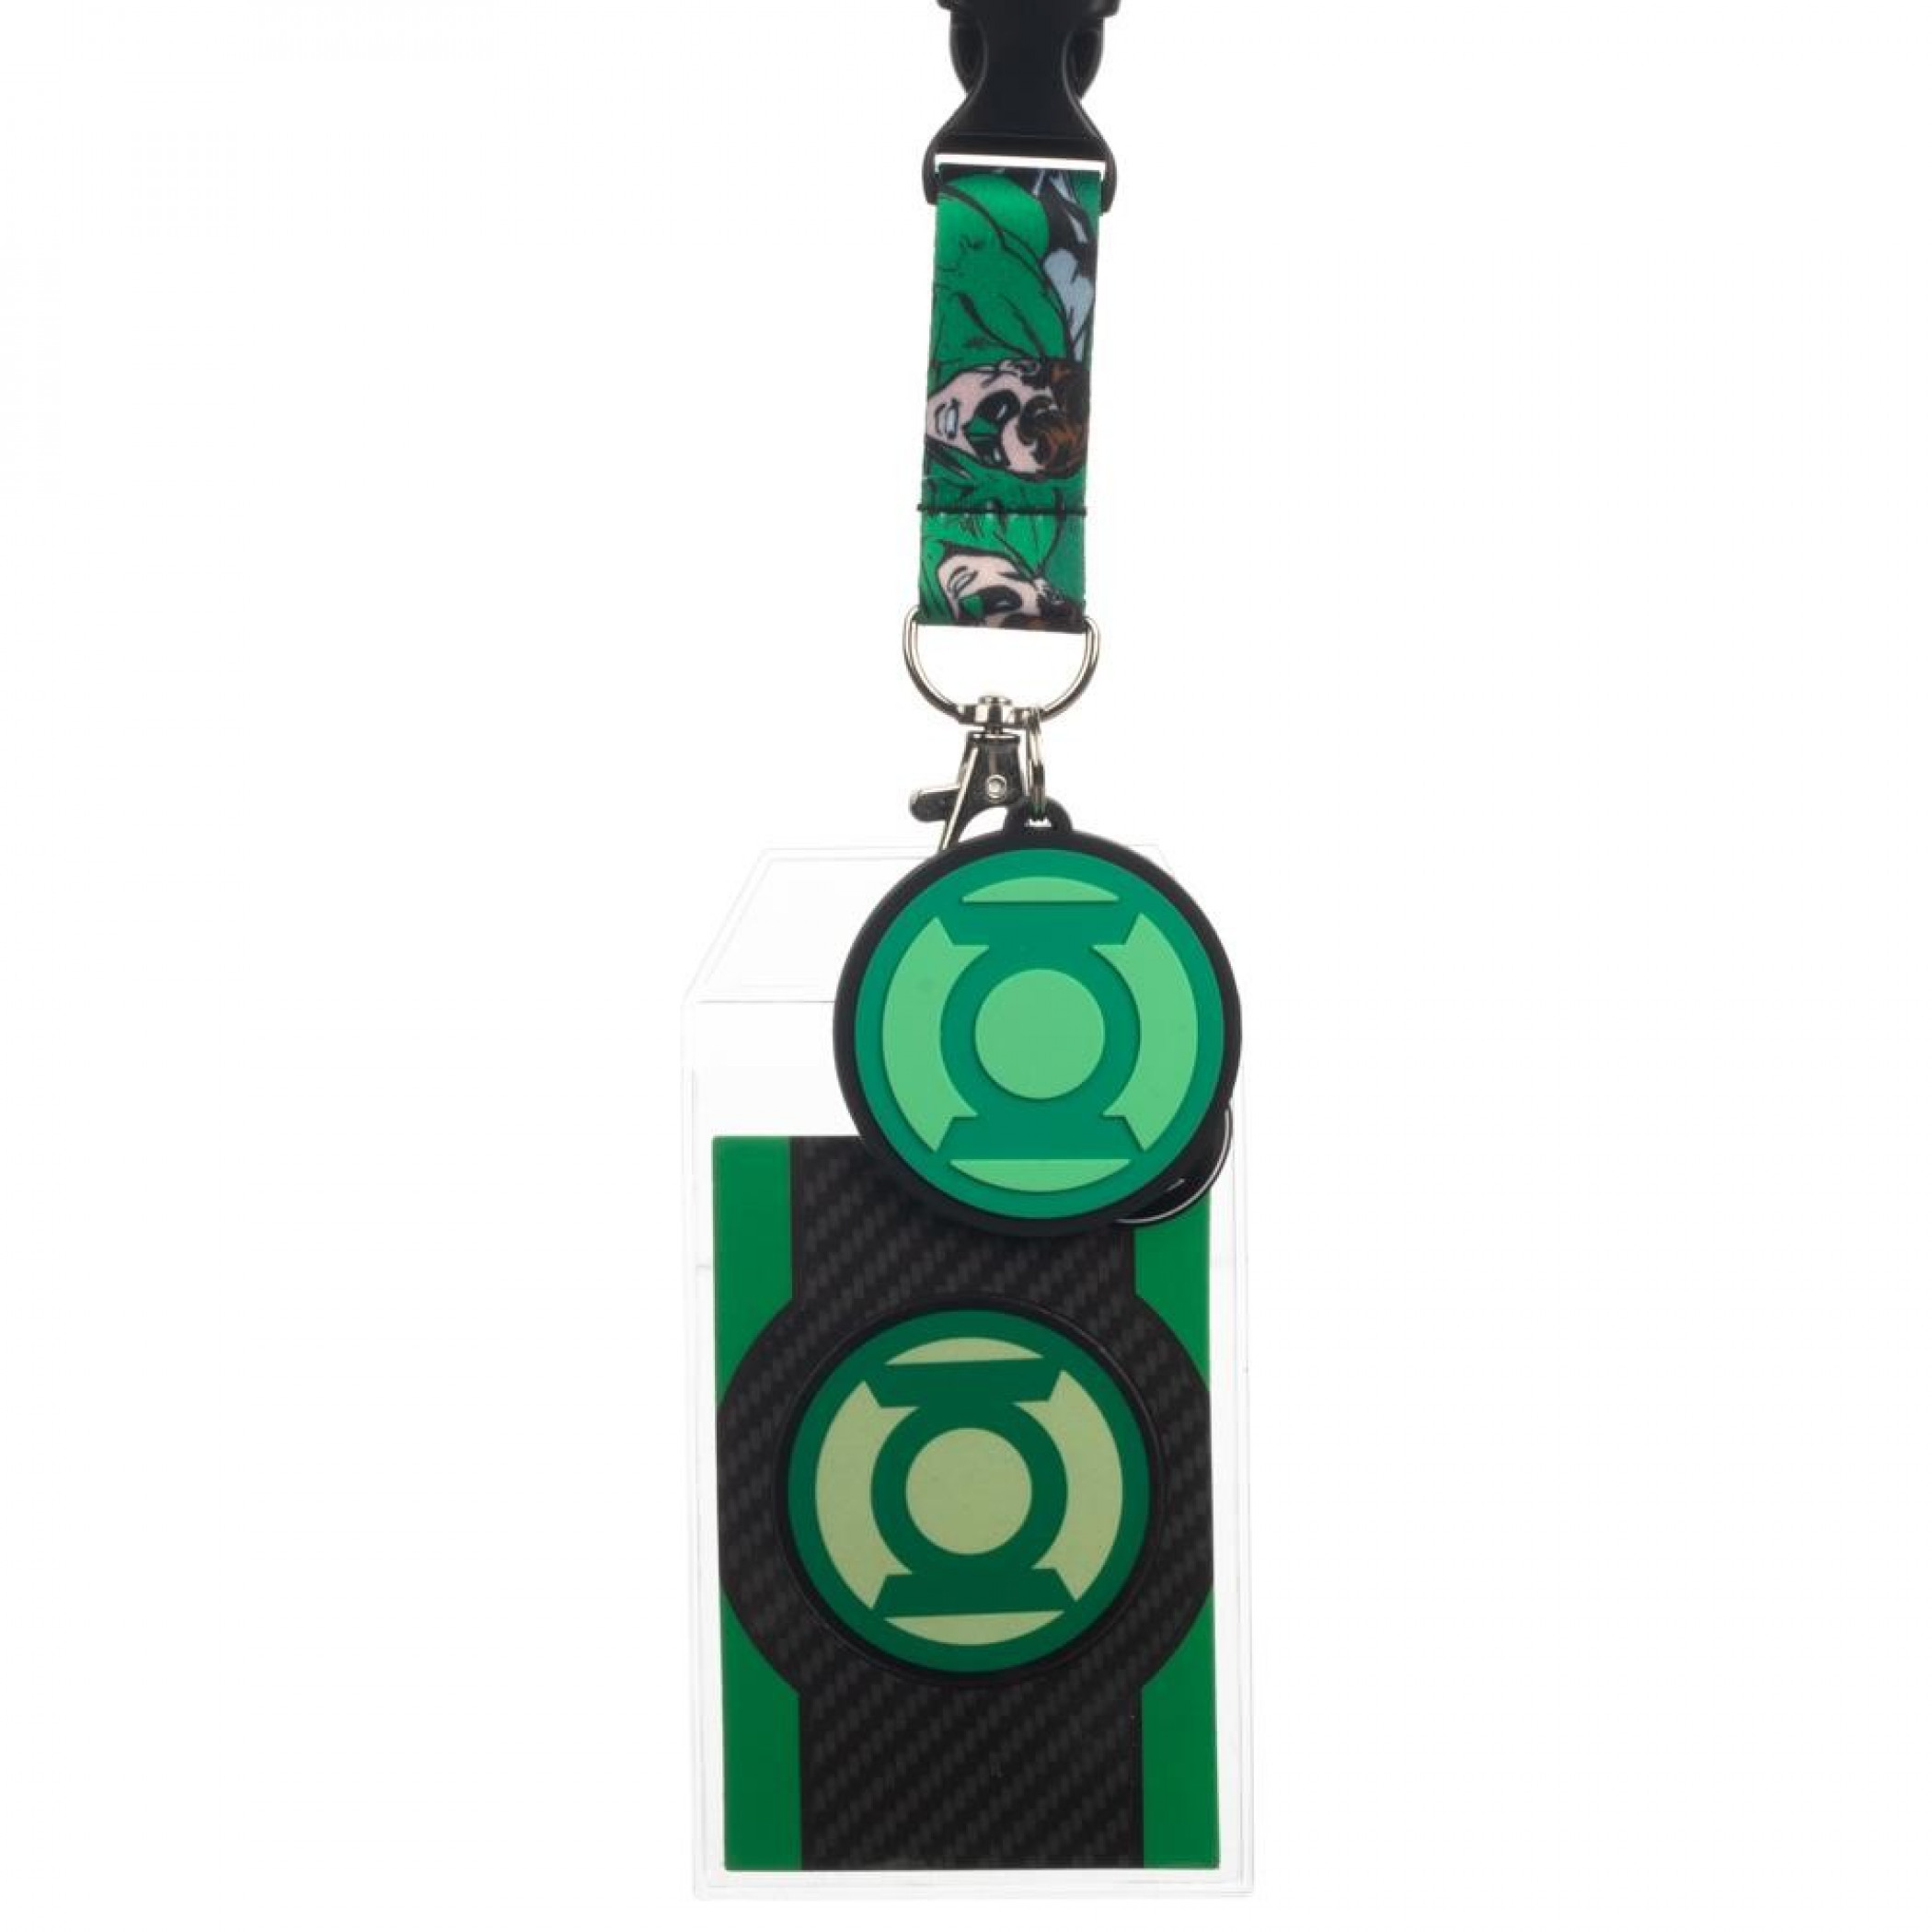 Green Lantern All Corps Symbols Lanyard with Charm and Sticker